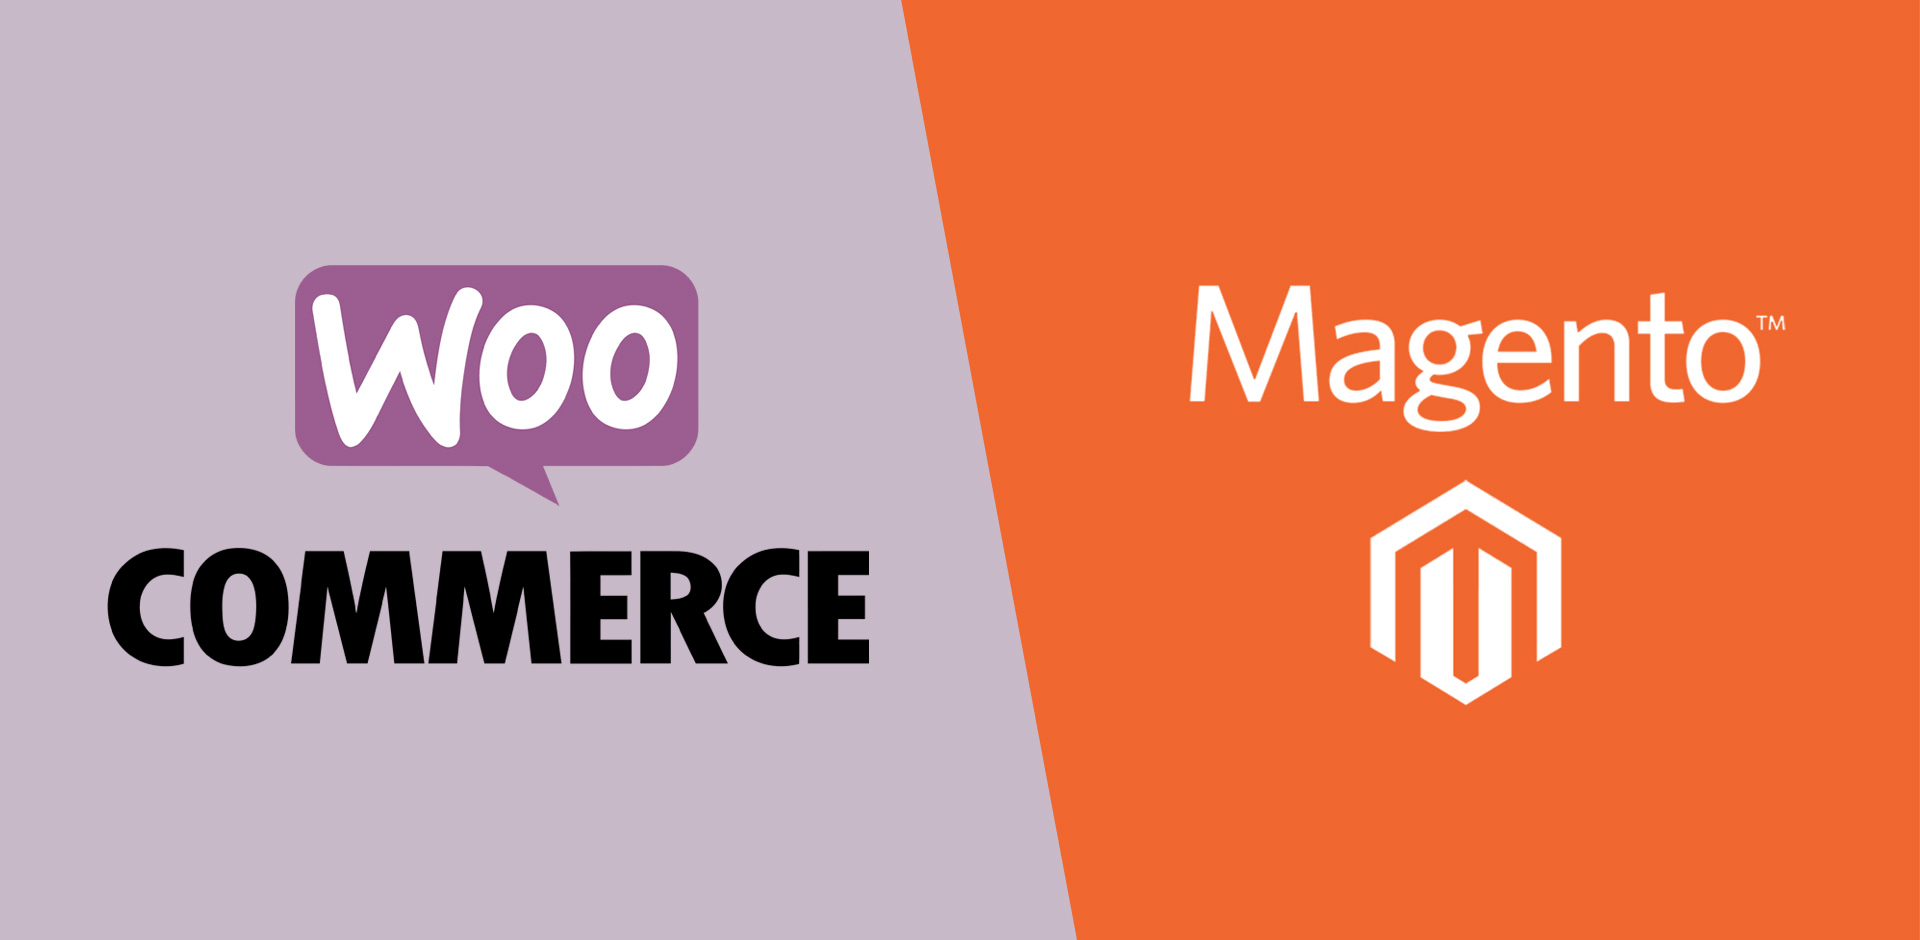 Magento and WooCommerce - Open-source compared